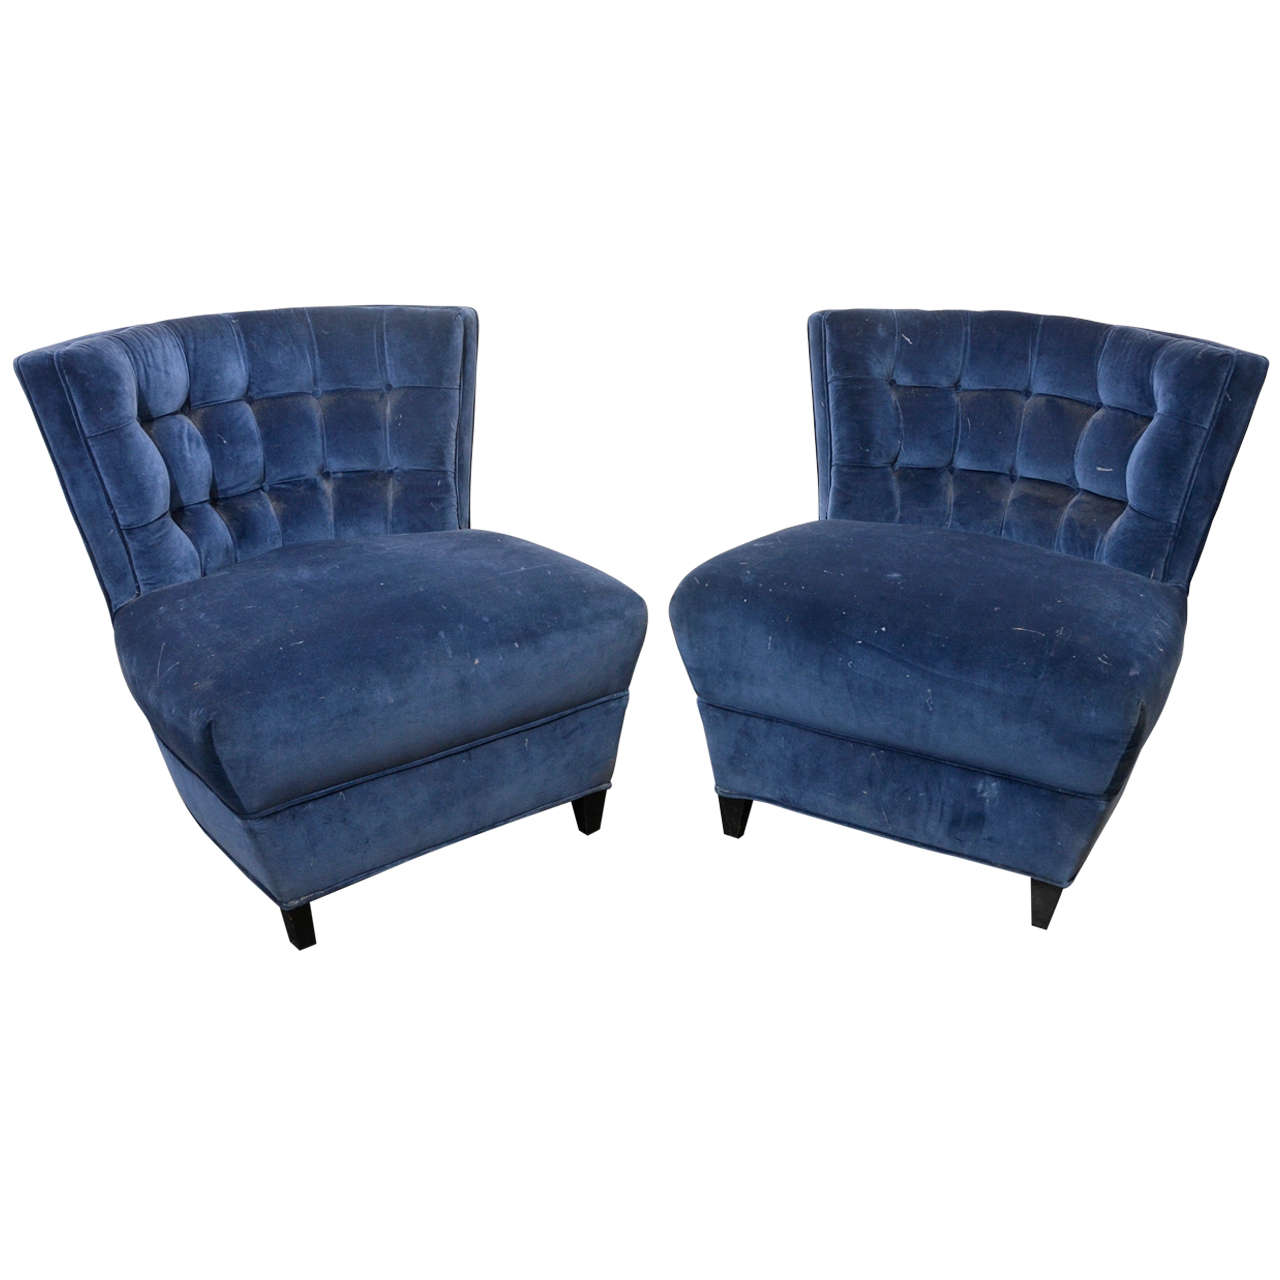 Pair of slipper chairs By James Mont